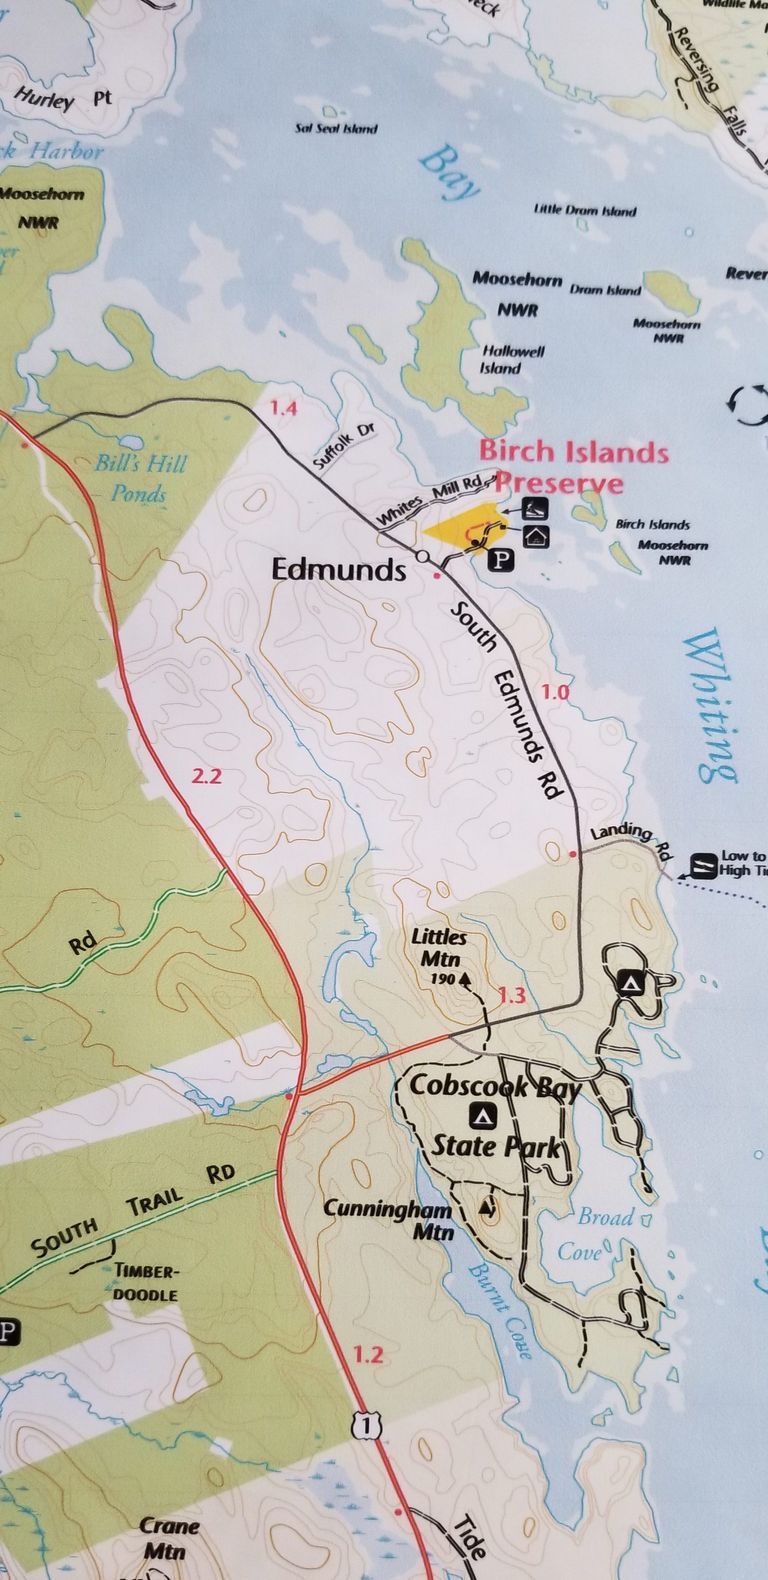          Conservation Land on the South Edmunds, Road, Edmunds, Maine; Detail of land under conservation management on the South Edmunds Road, including Cobscook Bay State Park, the Moosehorn National Wildlife Refuge and the Birch Island Preserve, on a trail map prepared by Cobscook Shores Foundation in 2022.
   